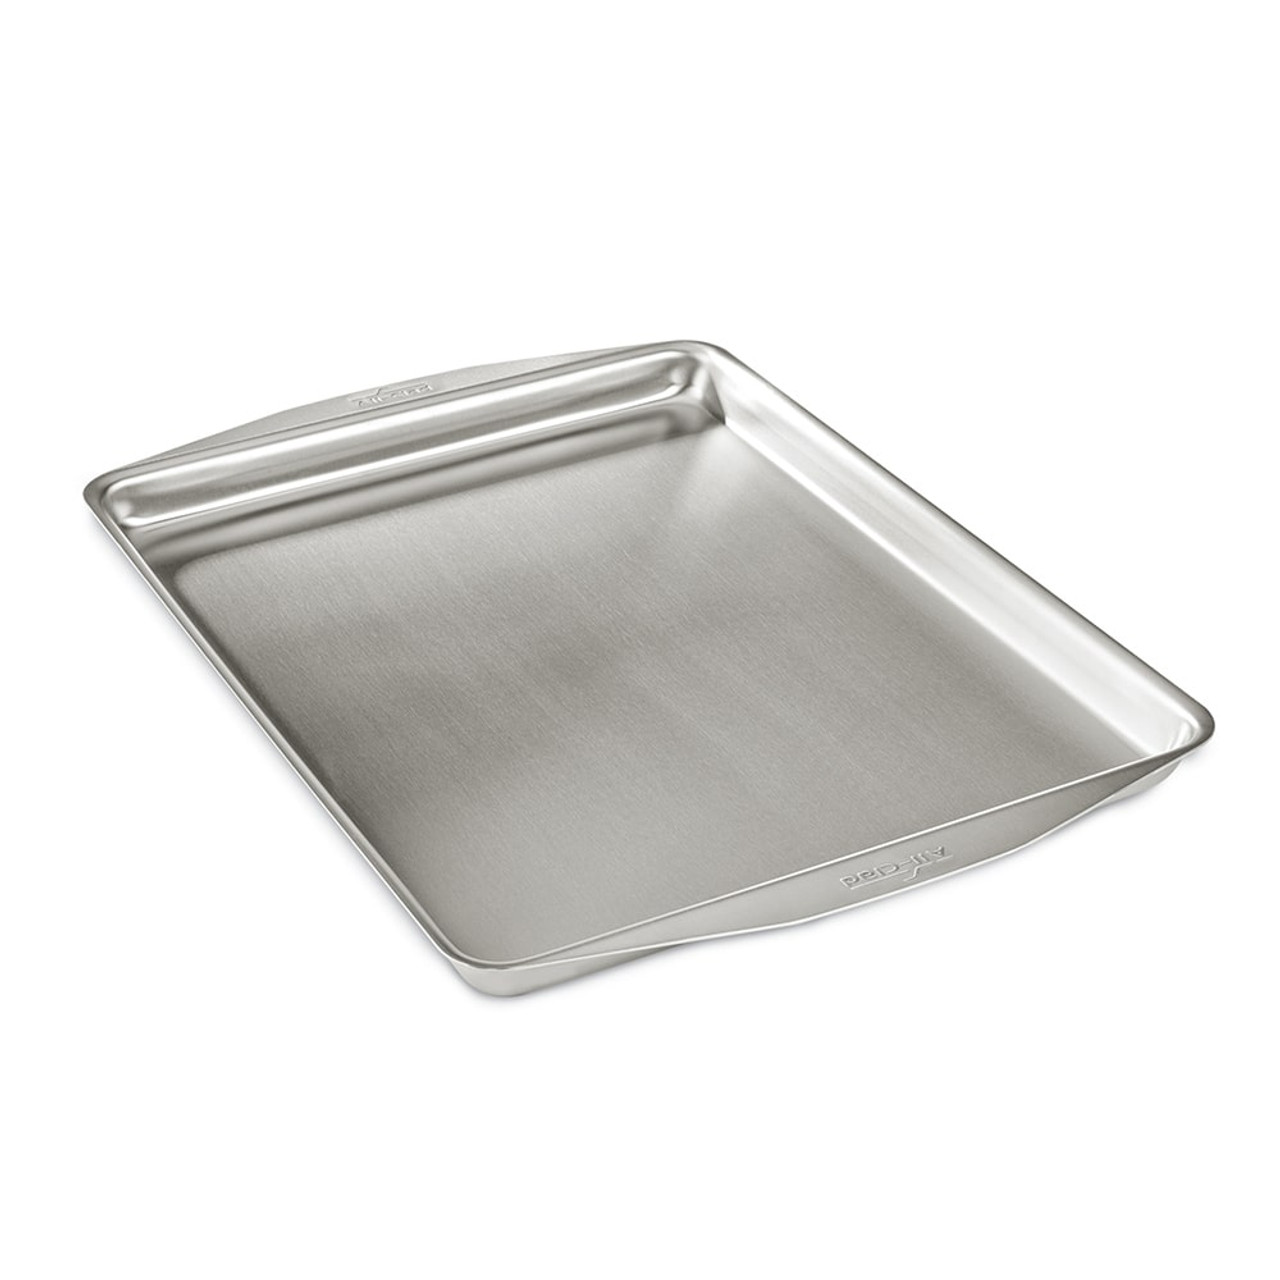 Jelly Roll Pan Ss, 1 Pack - Kroger